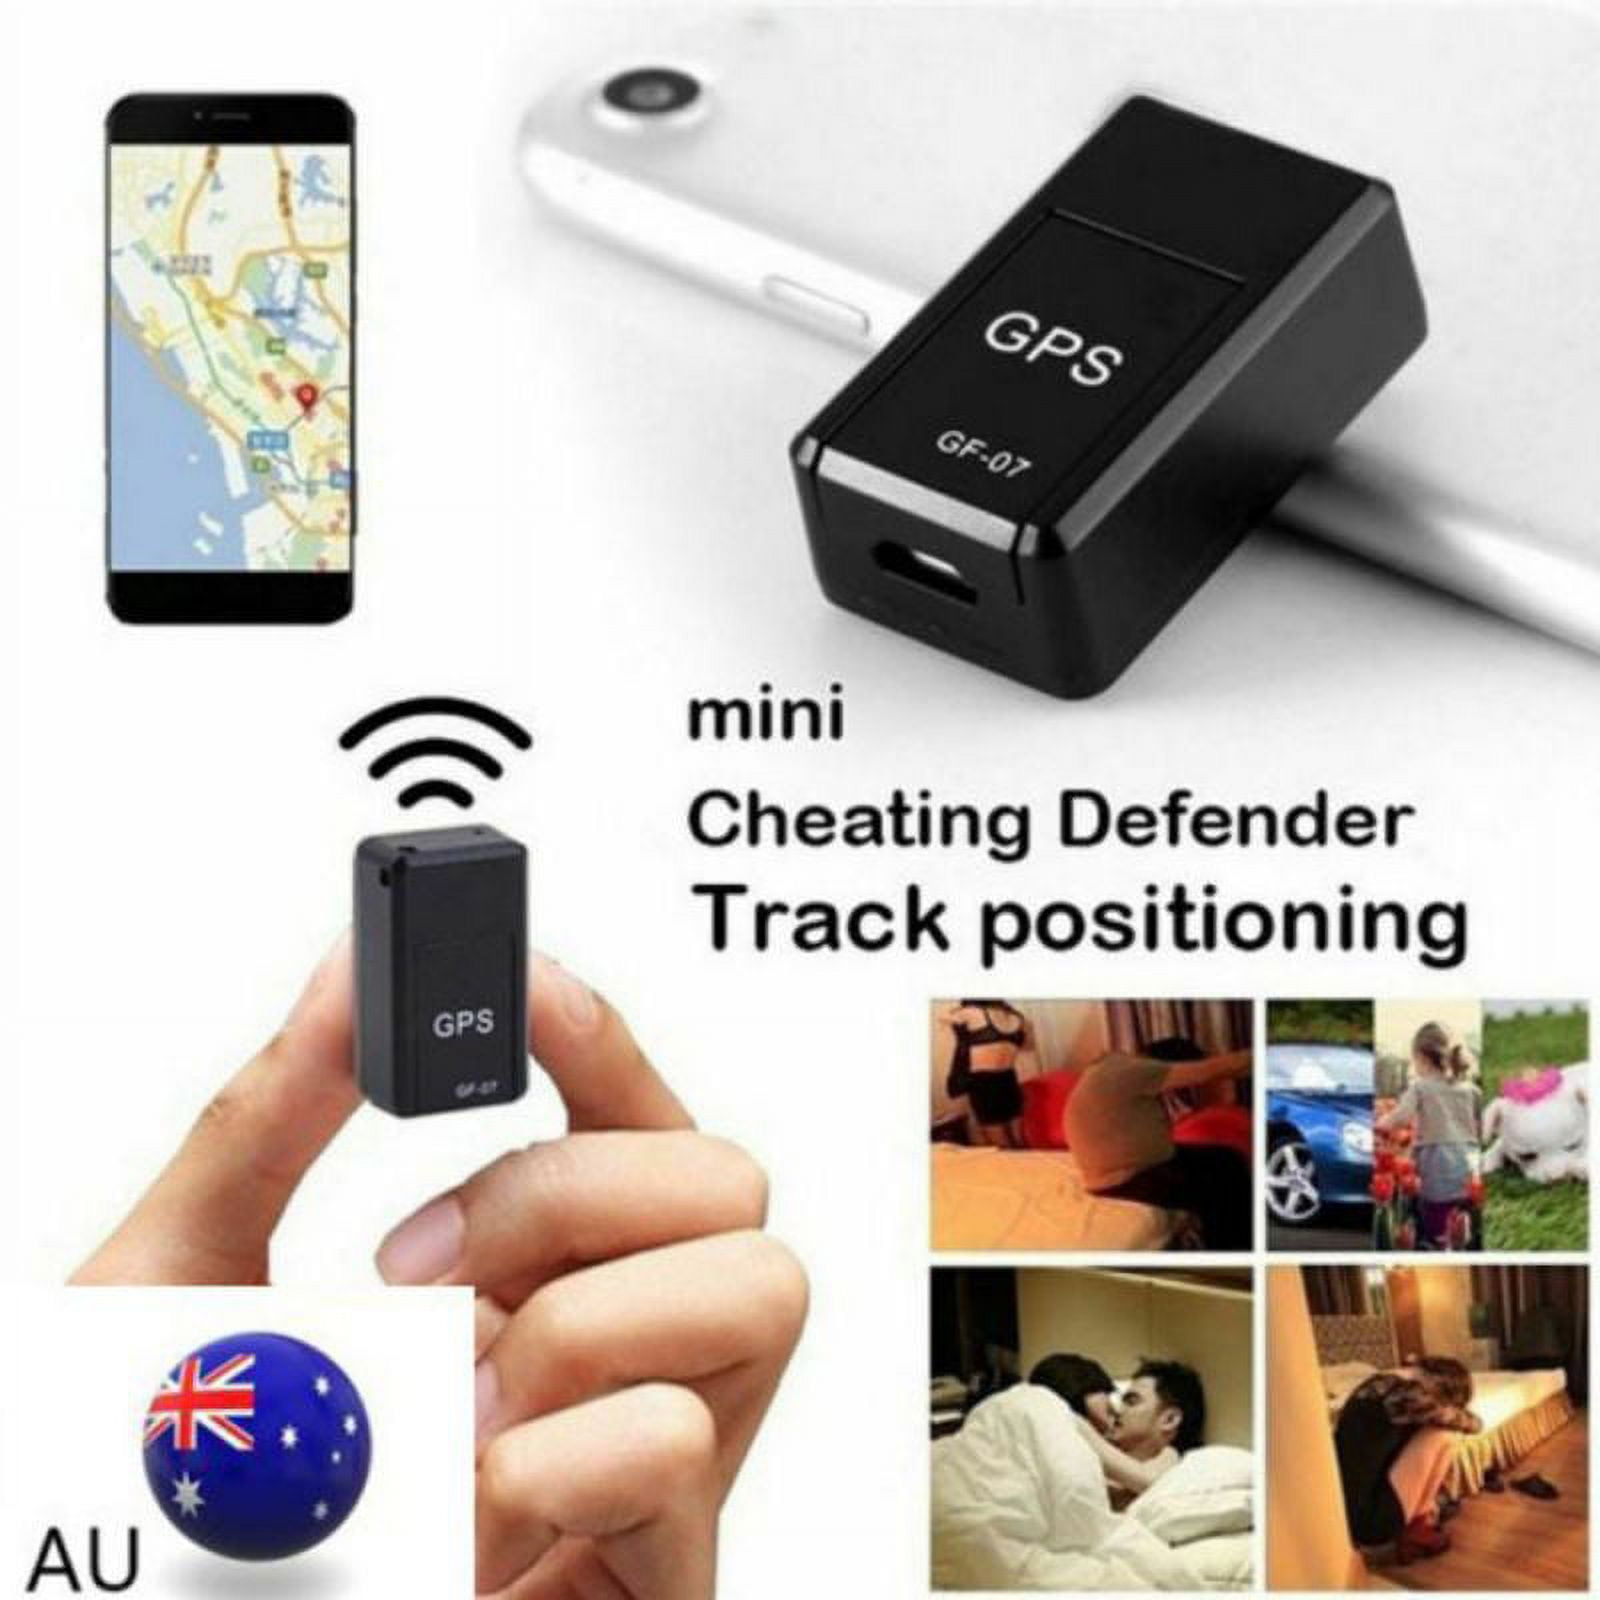 New GF-07 Mini GPS Tracker APP Control Anti-Theft Device Locator Magnetic  Voice Recorder for Vehicle/Car/Person Location